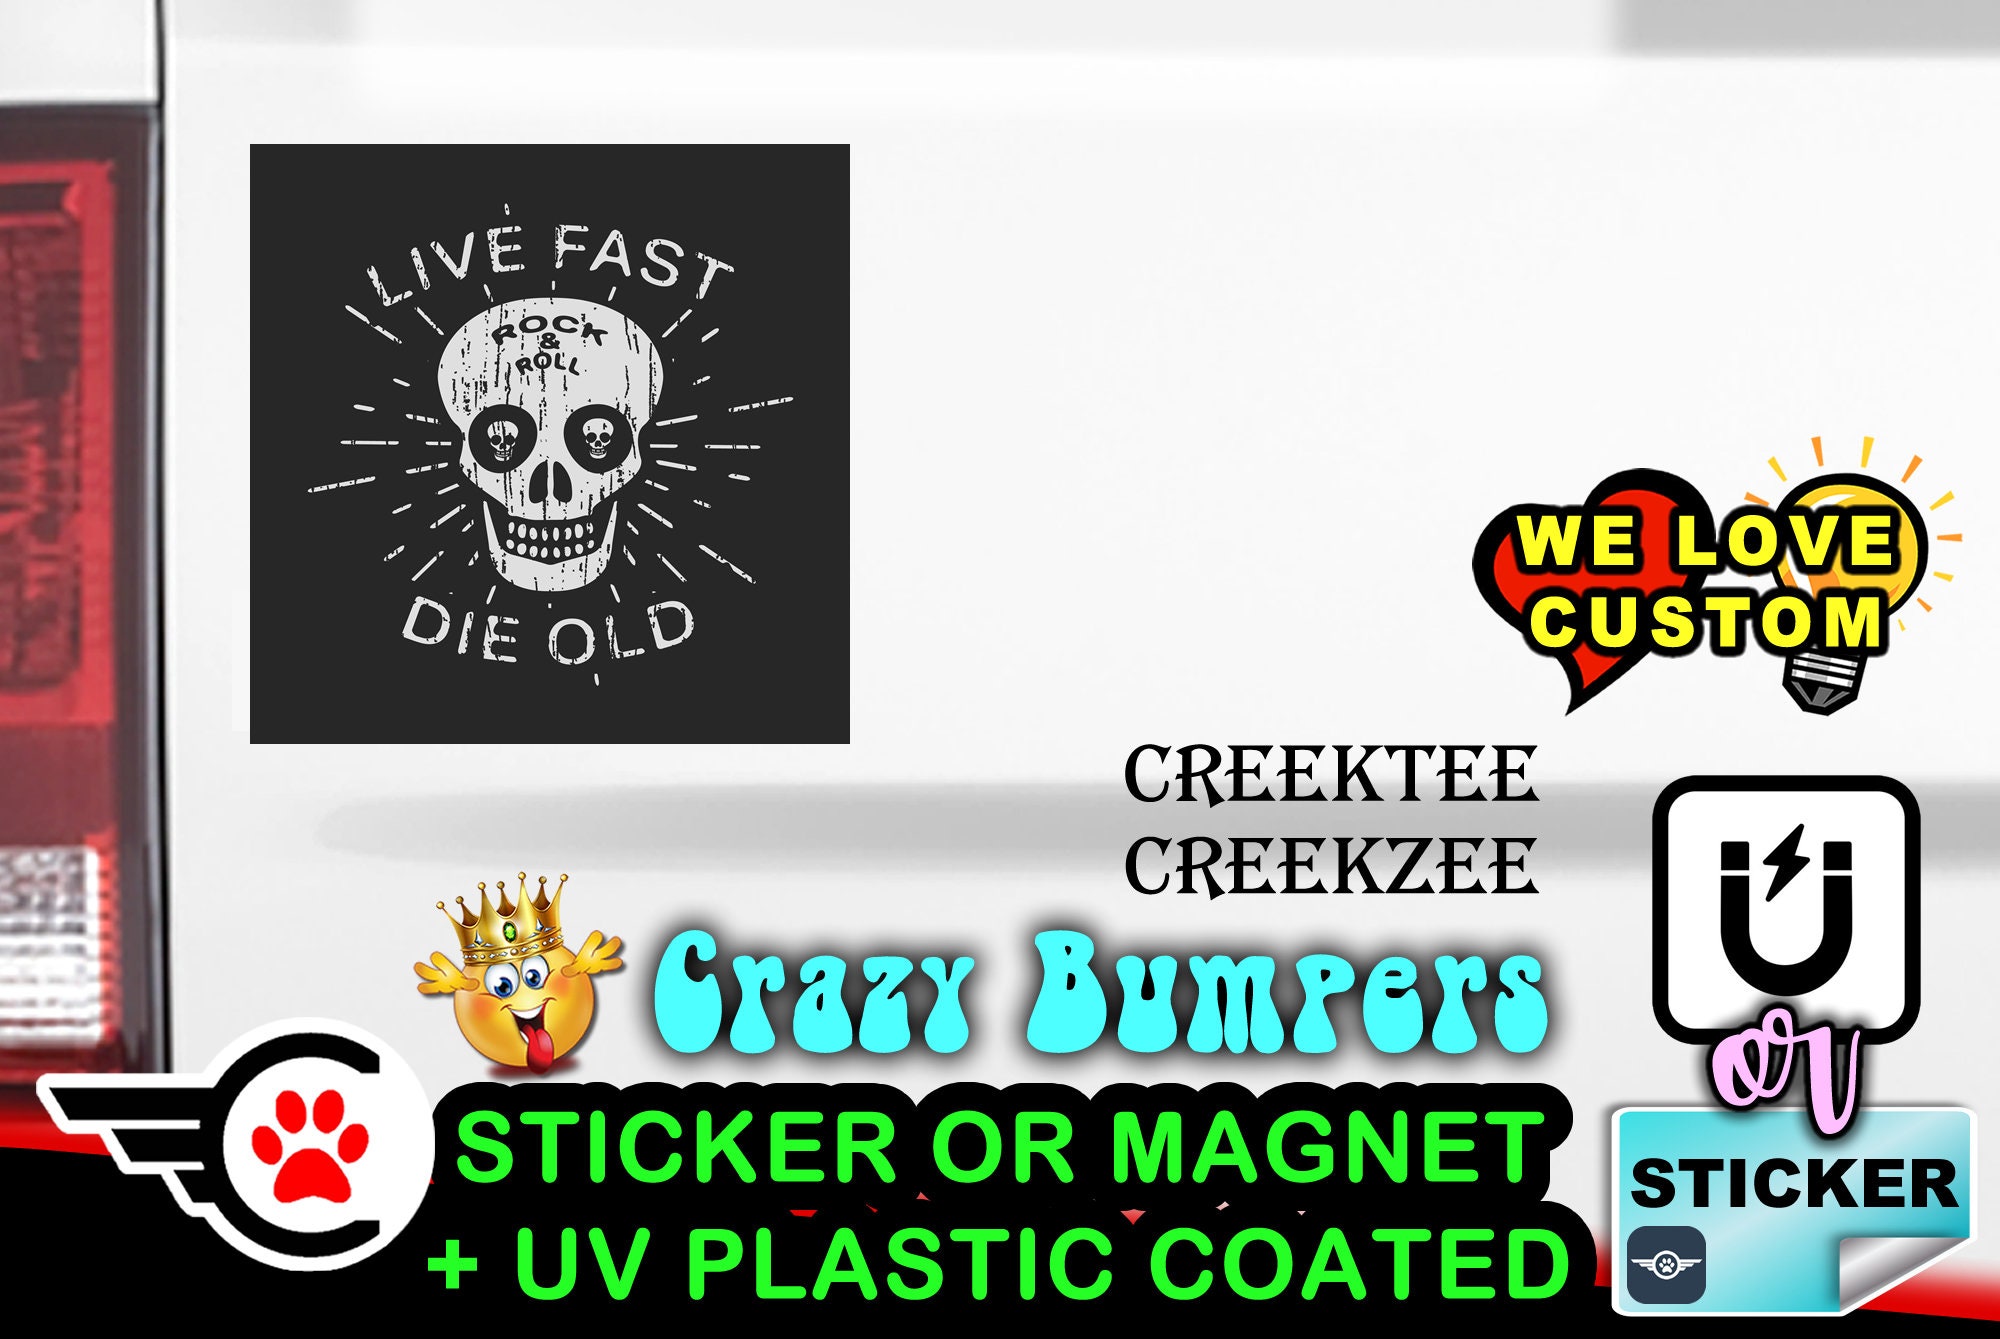 Live Fast Rock & Roll Die Old Bumper Sticker or Magnet in various sizes Hiqh Quality UV Laminate Coating 2